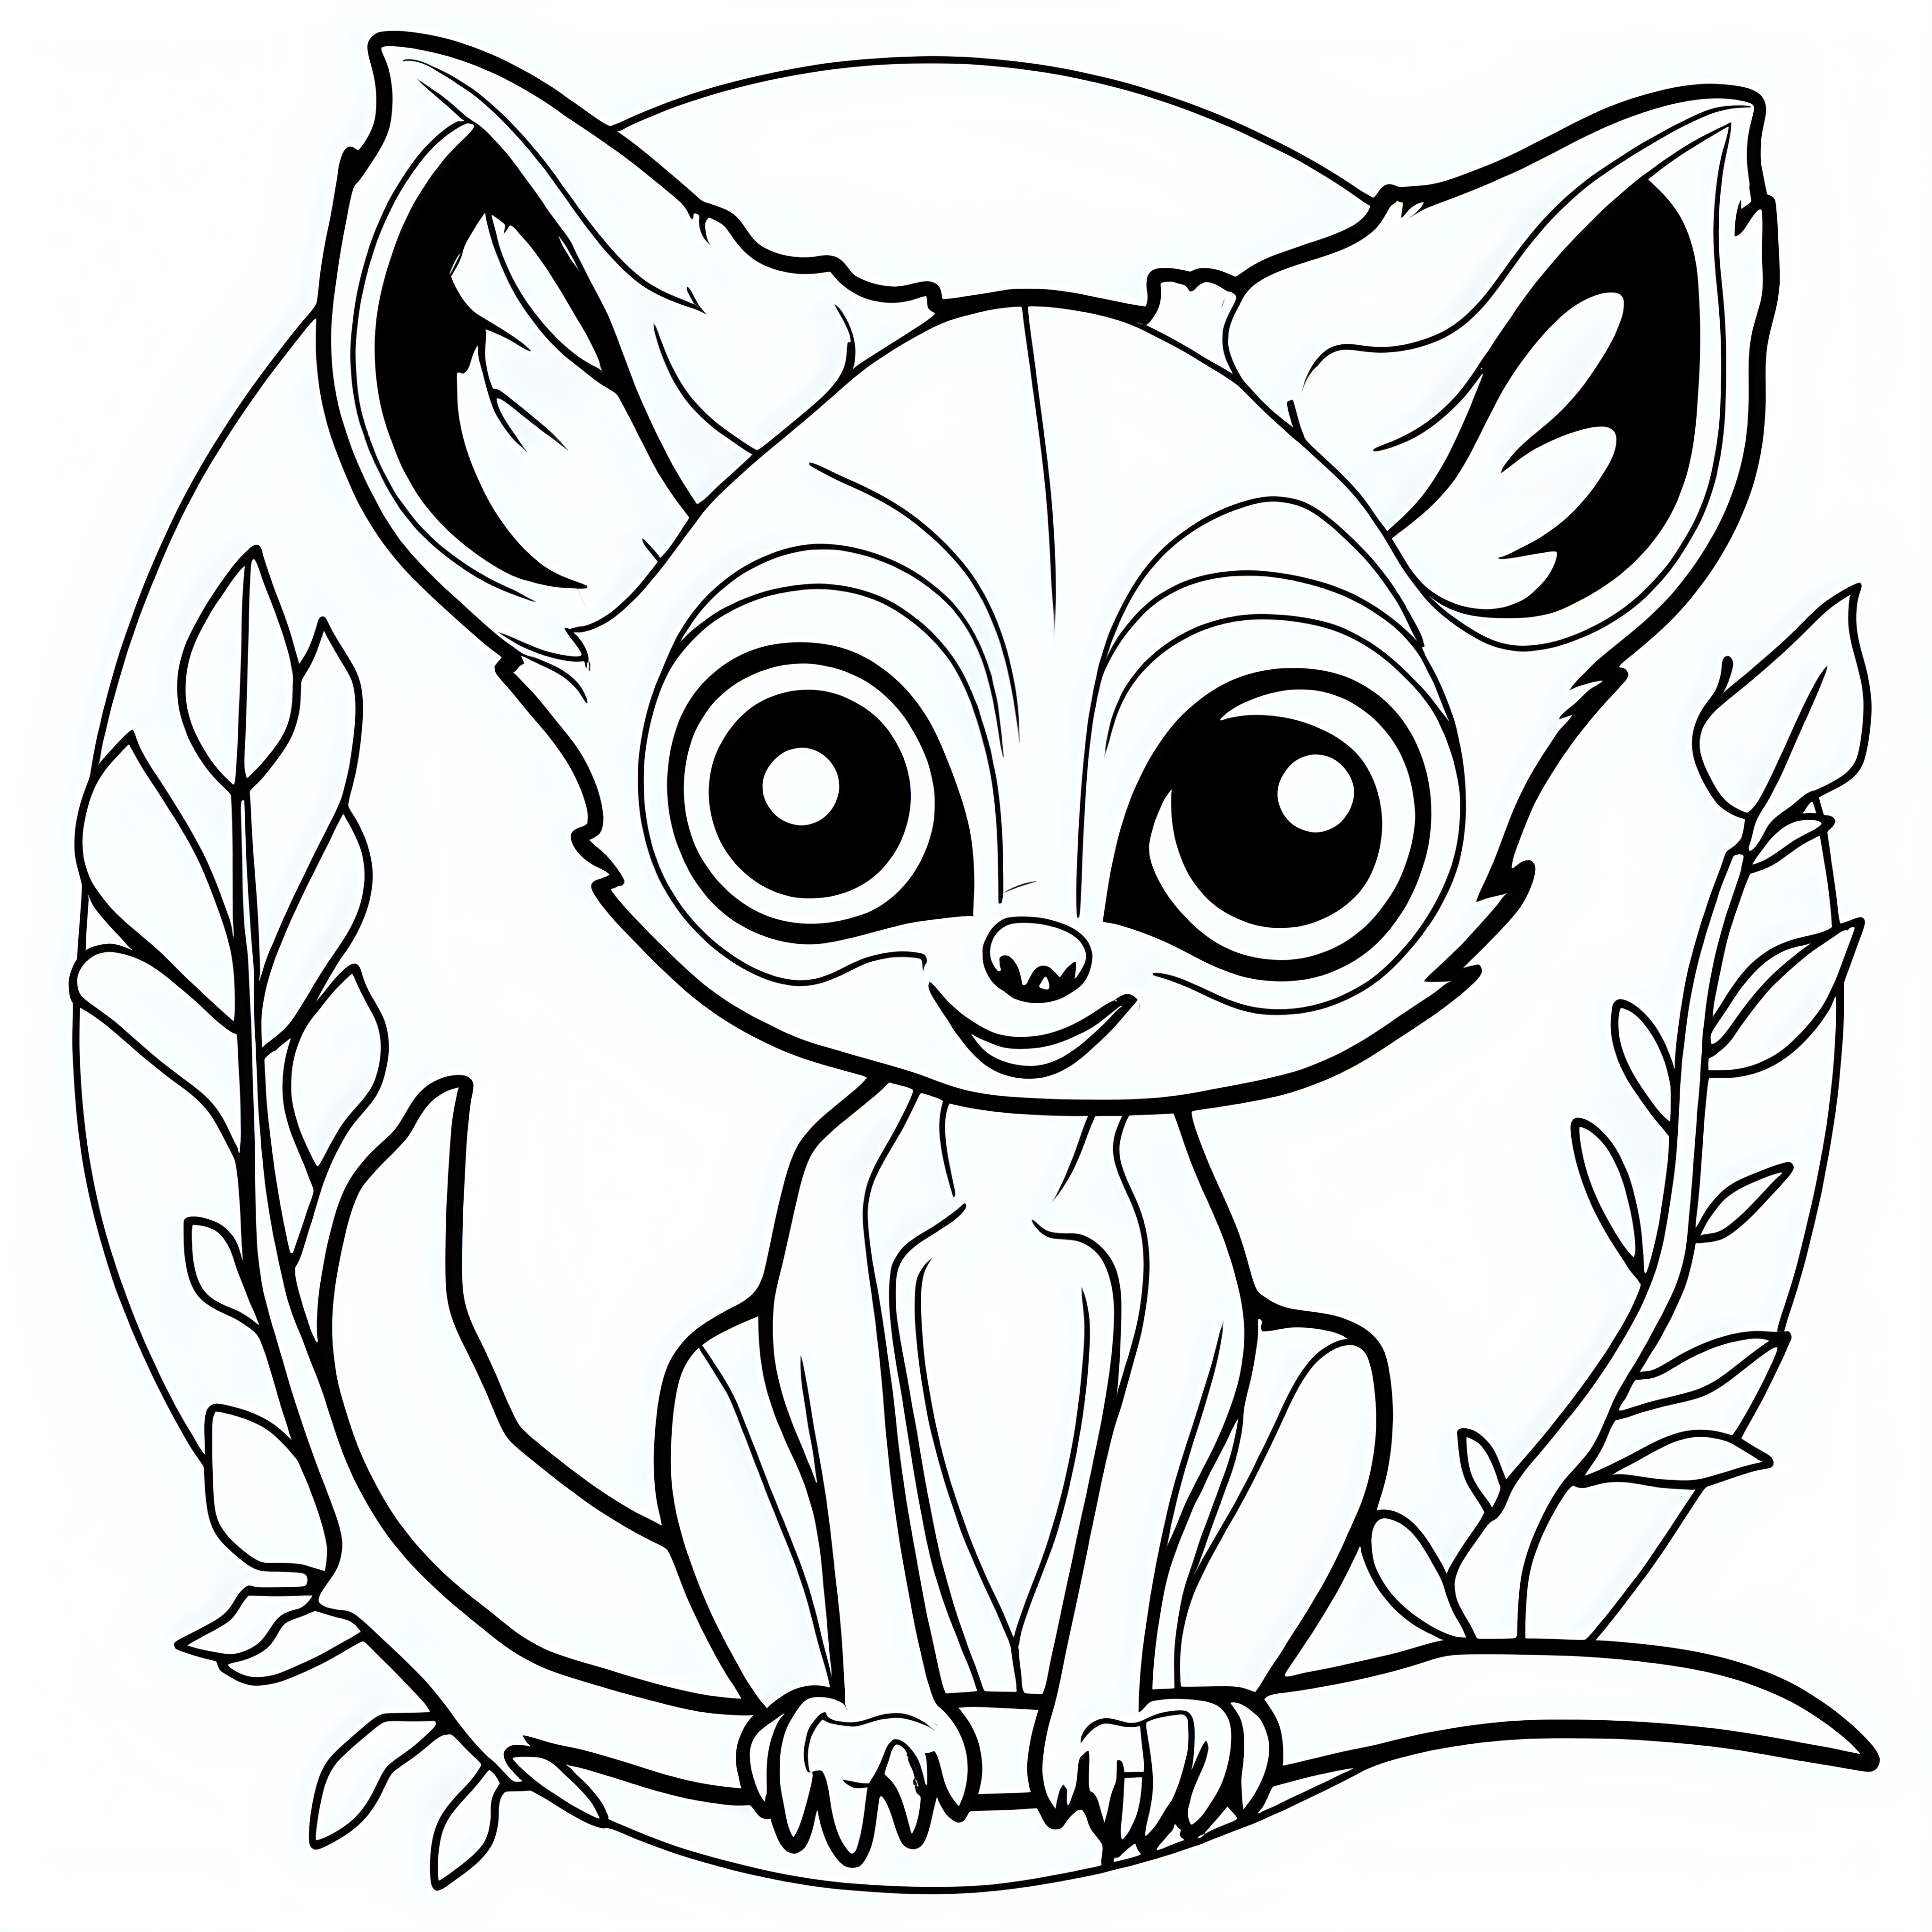 draw a cute Galago with only the outline  for a coloring book